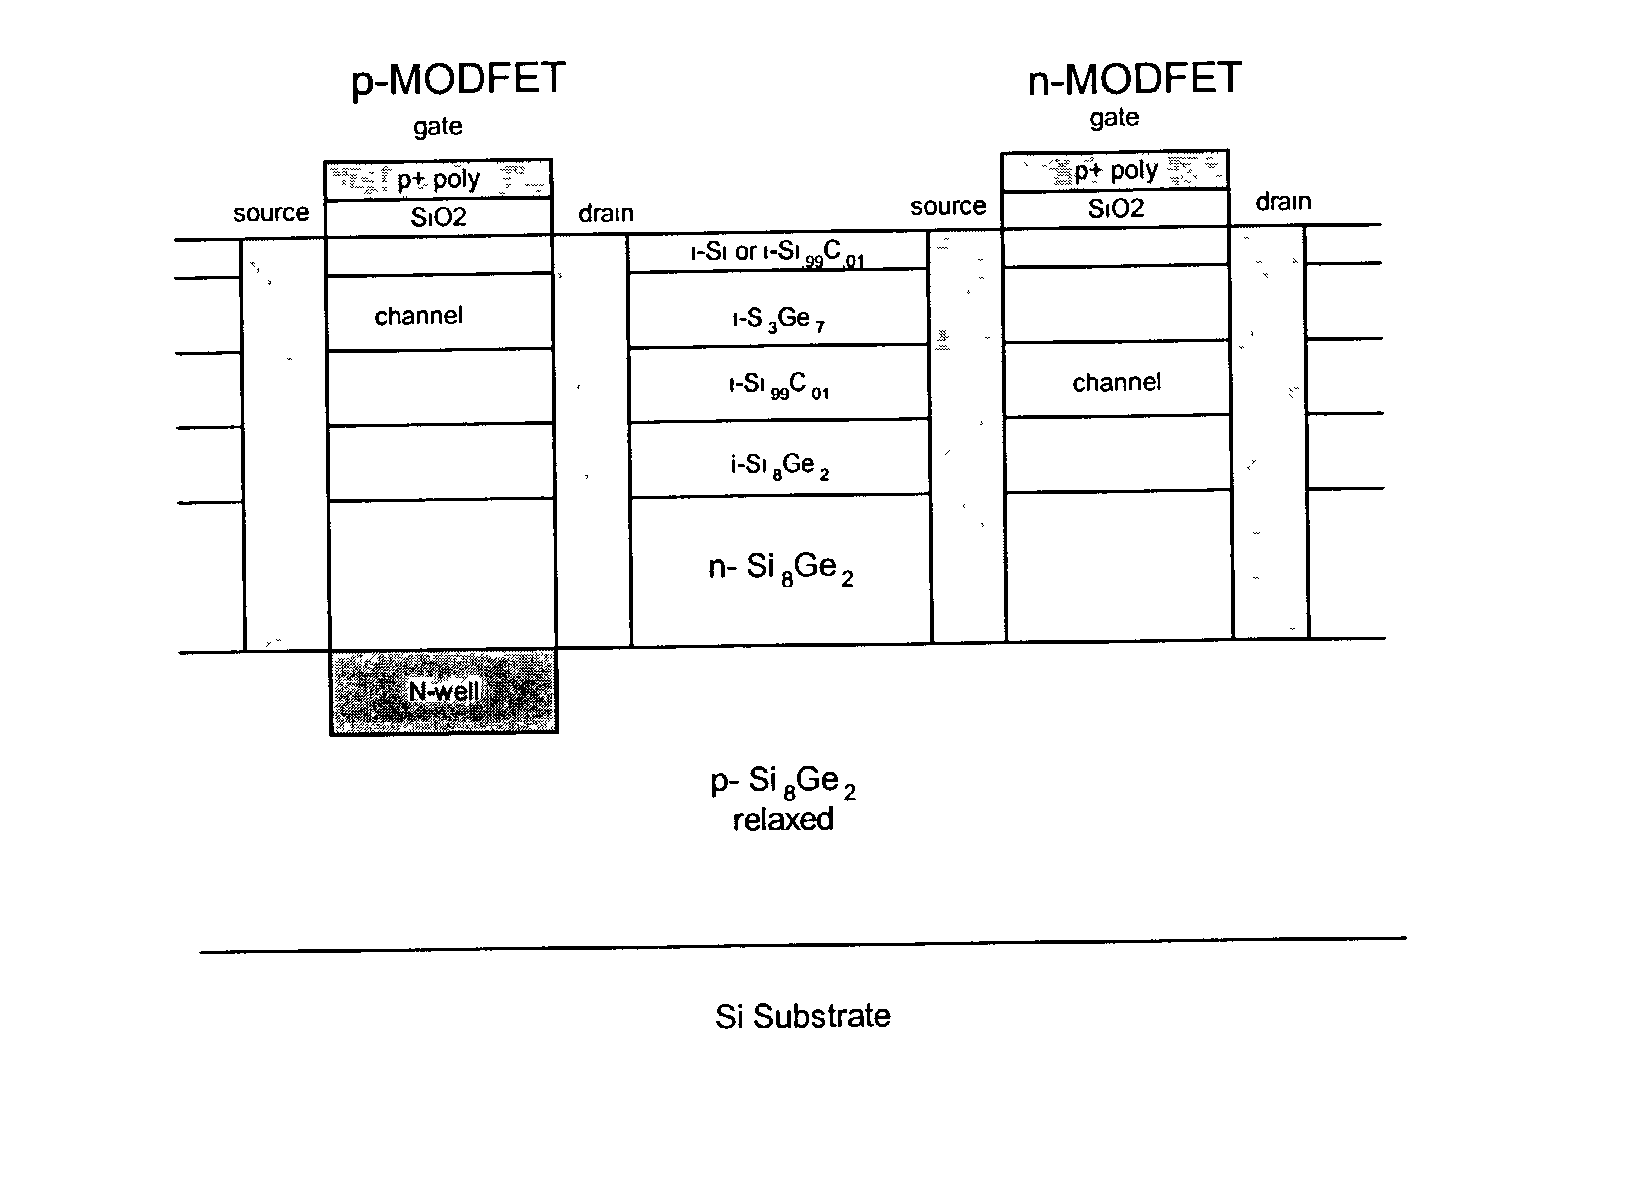 Heterojunction field effect transistors using silicon-germanium and silicon-carbon alloys